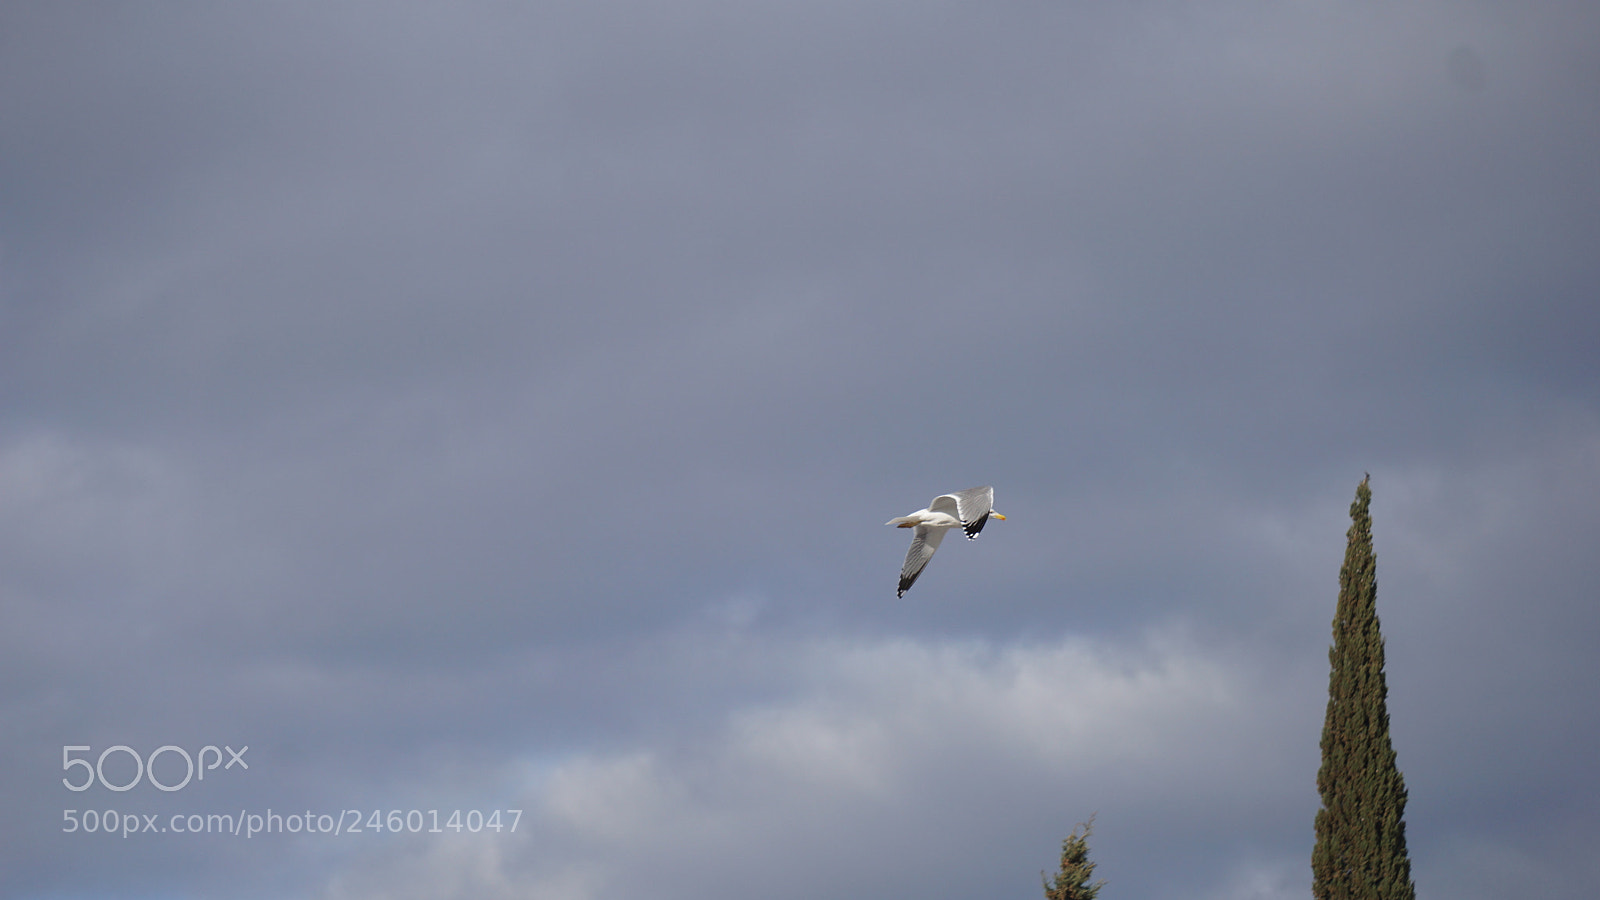 Sony a6000 sample photo. The lonely bird escaping photography